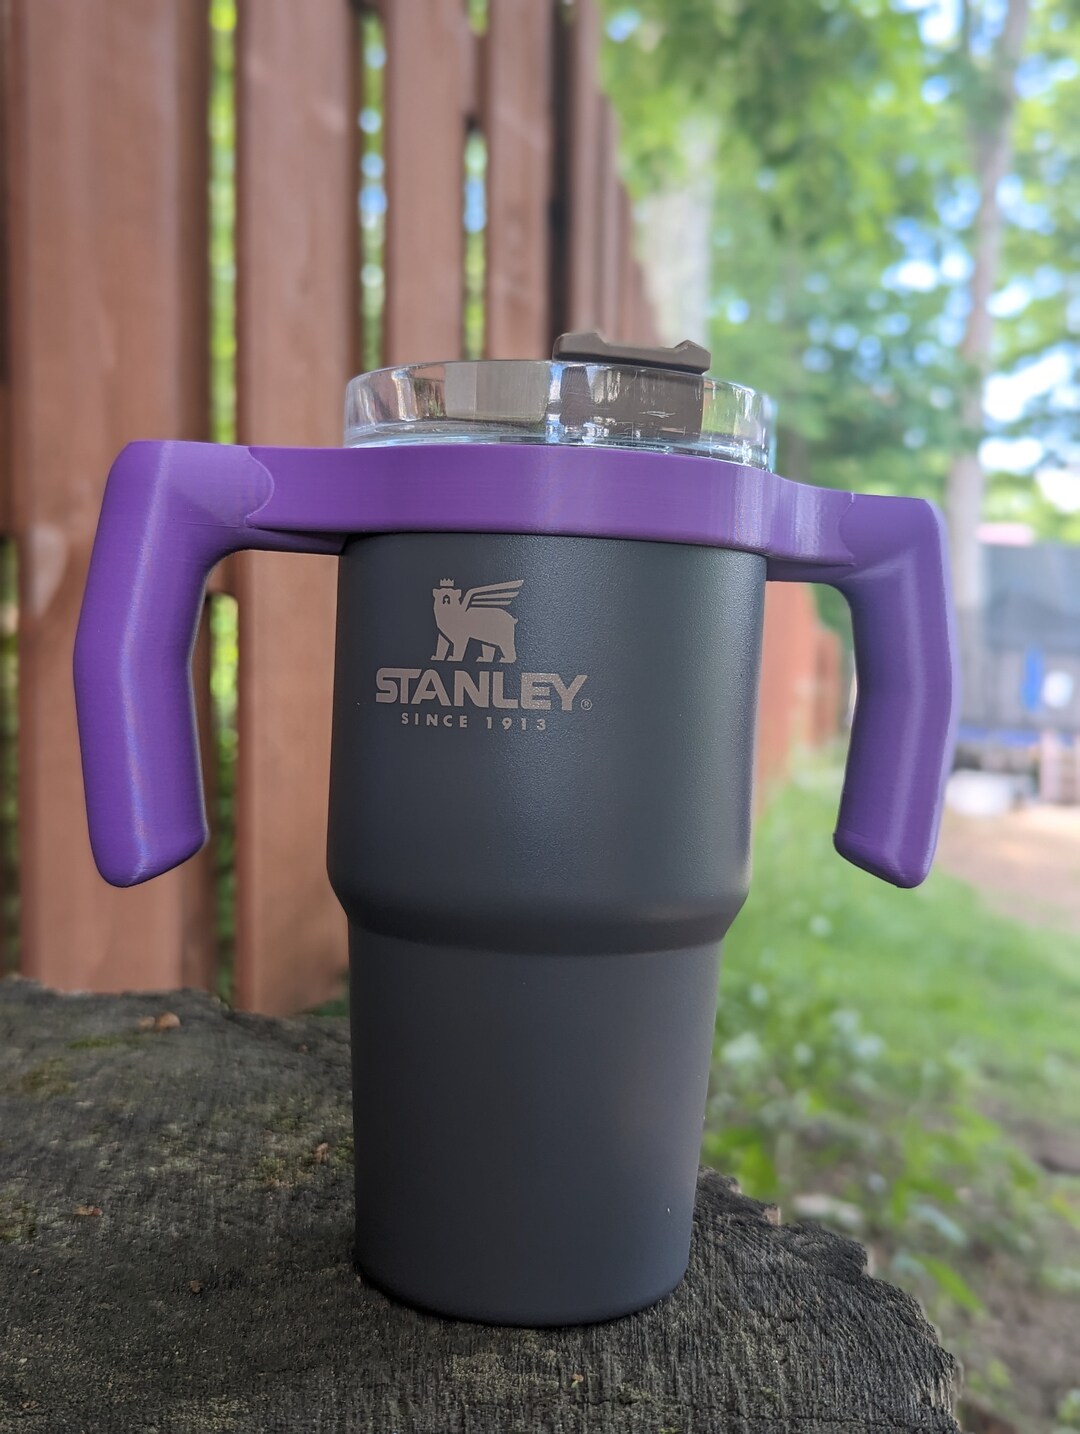  GFD Sippy Cup Handle Compatible with Stanley 14oz Tumbler -  Improved Grip, Reduced Spills : Home & Kitchen